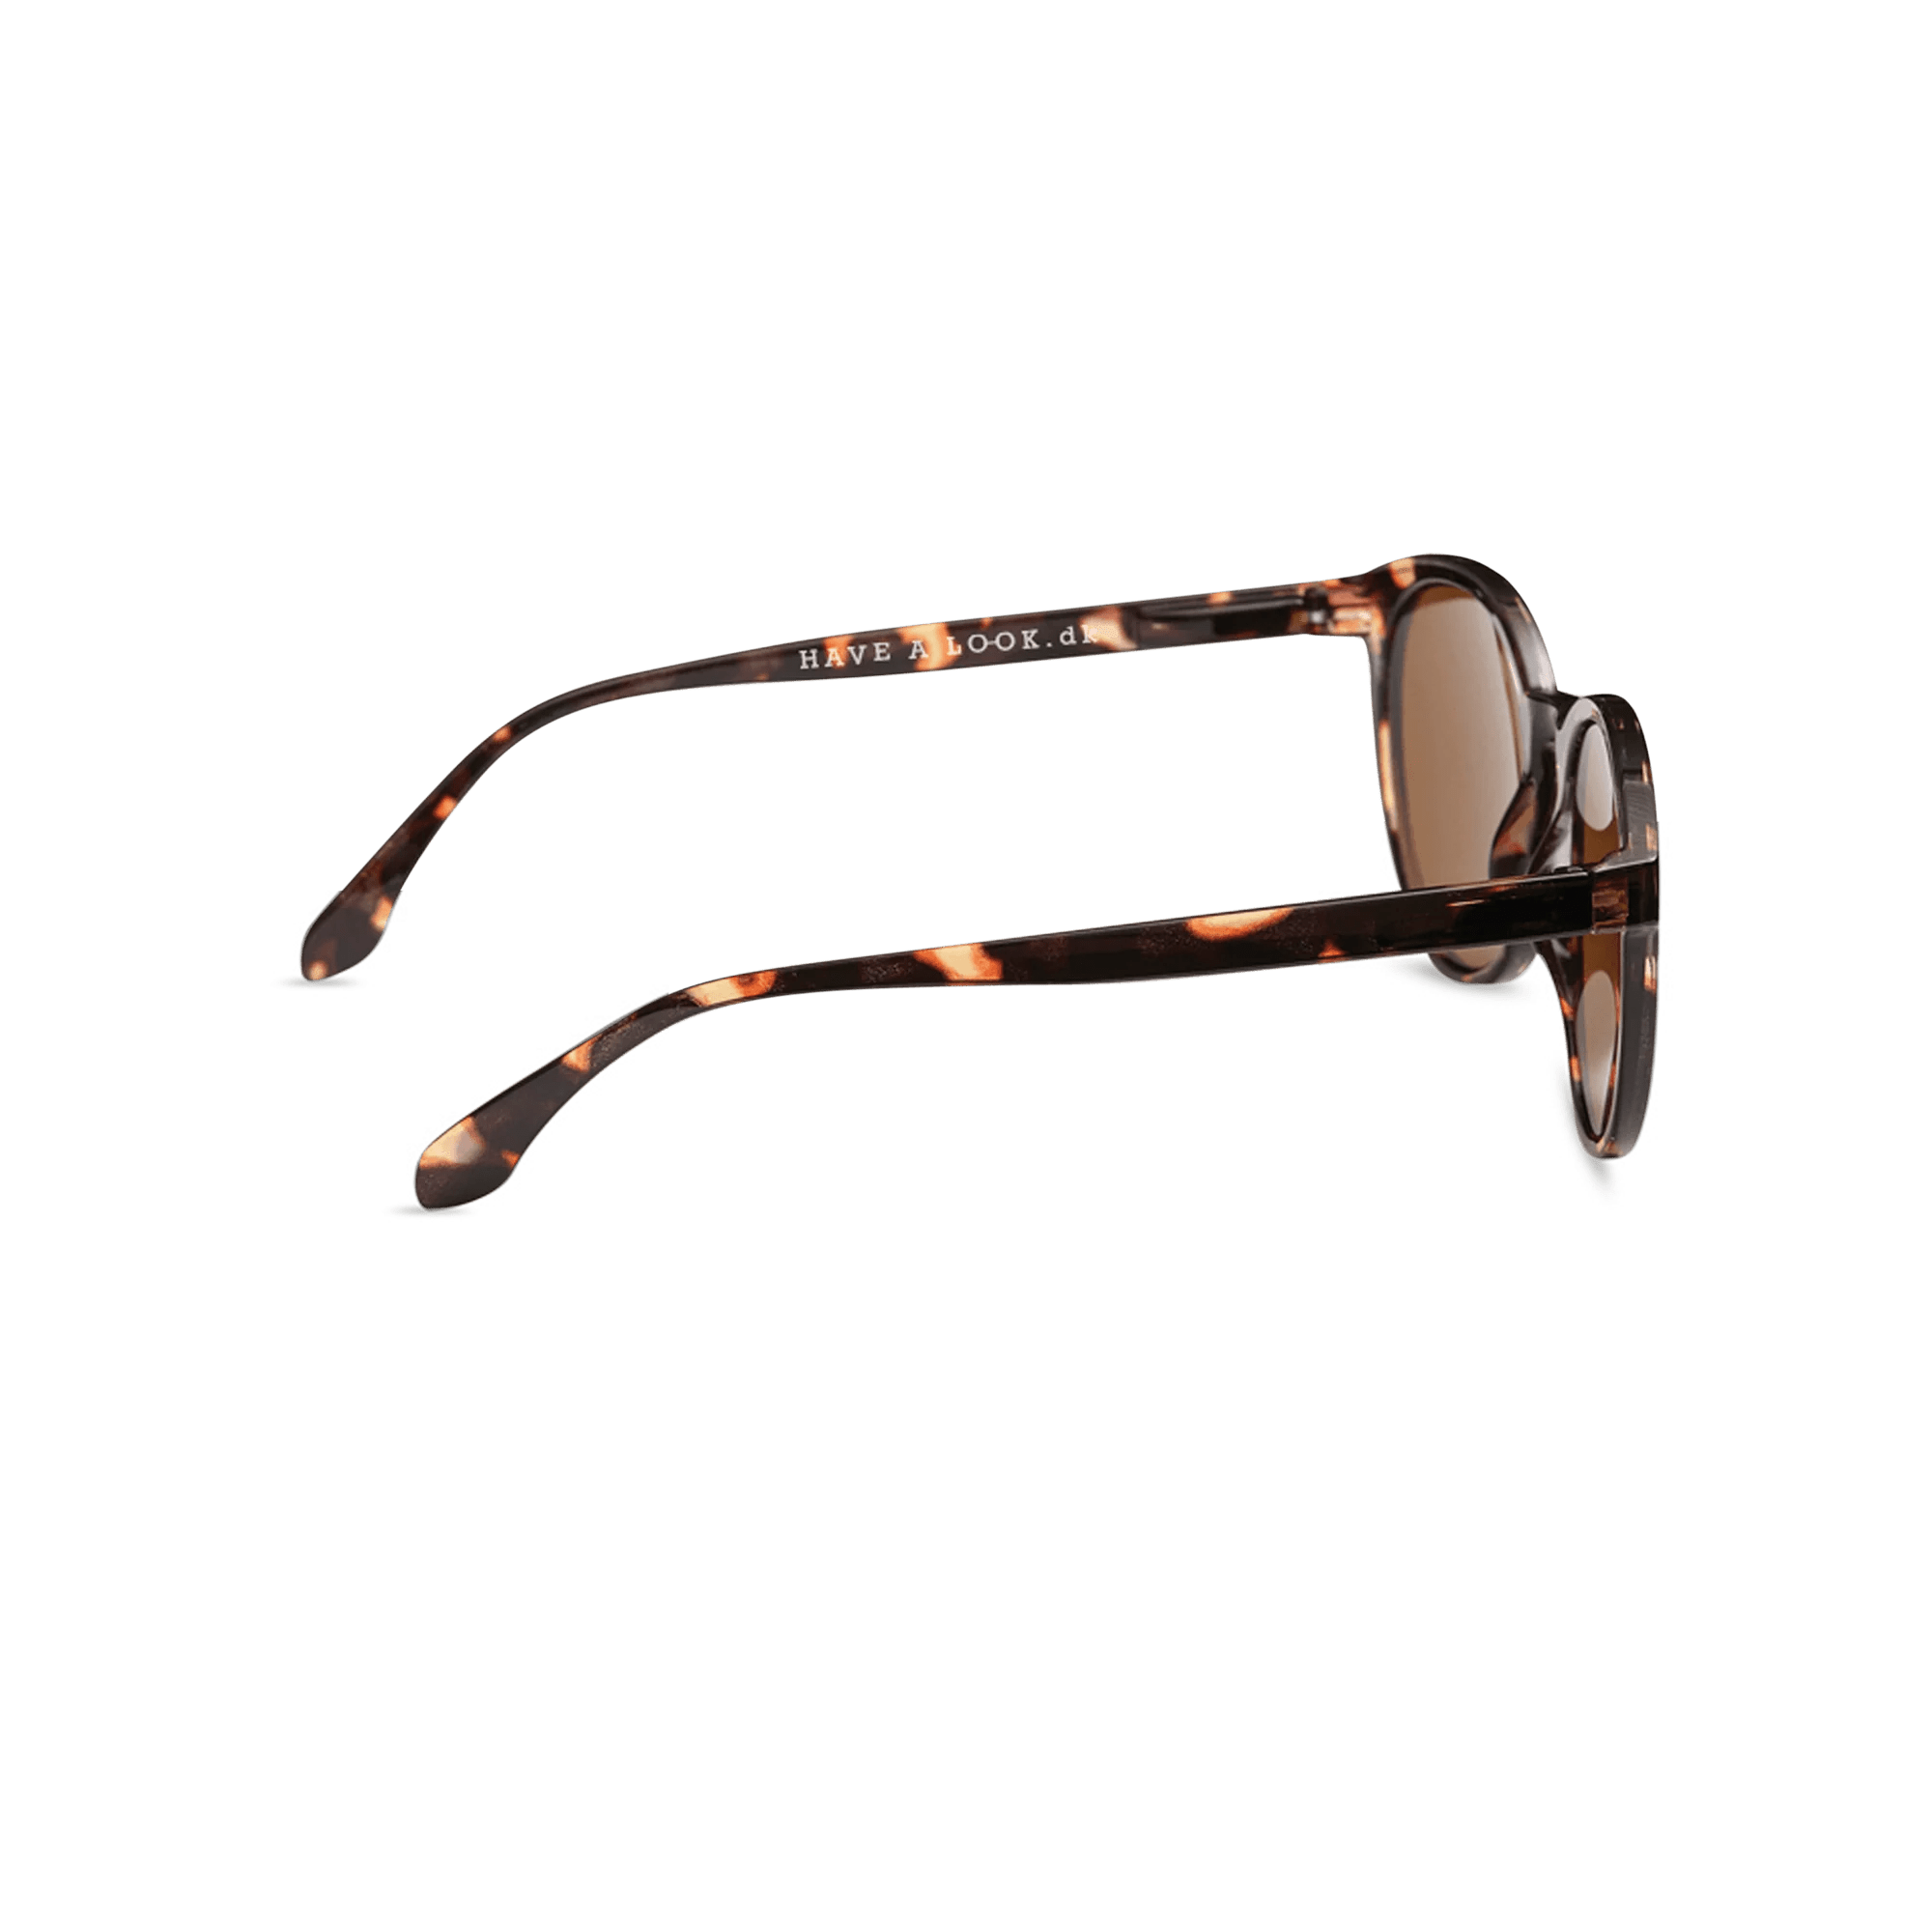 Diva Tortoise Sun Reading Glasses by Have A Look